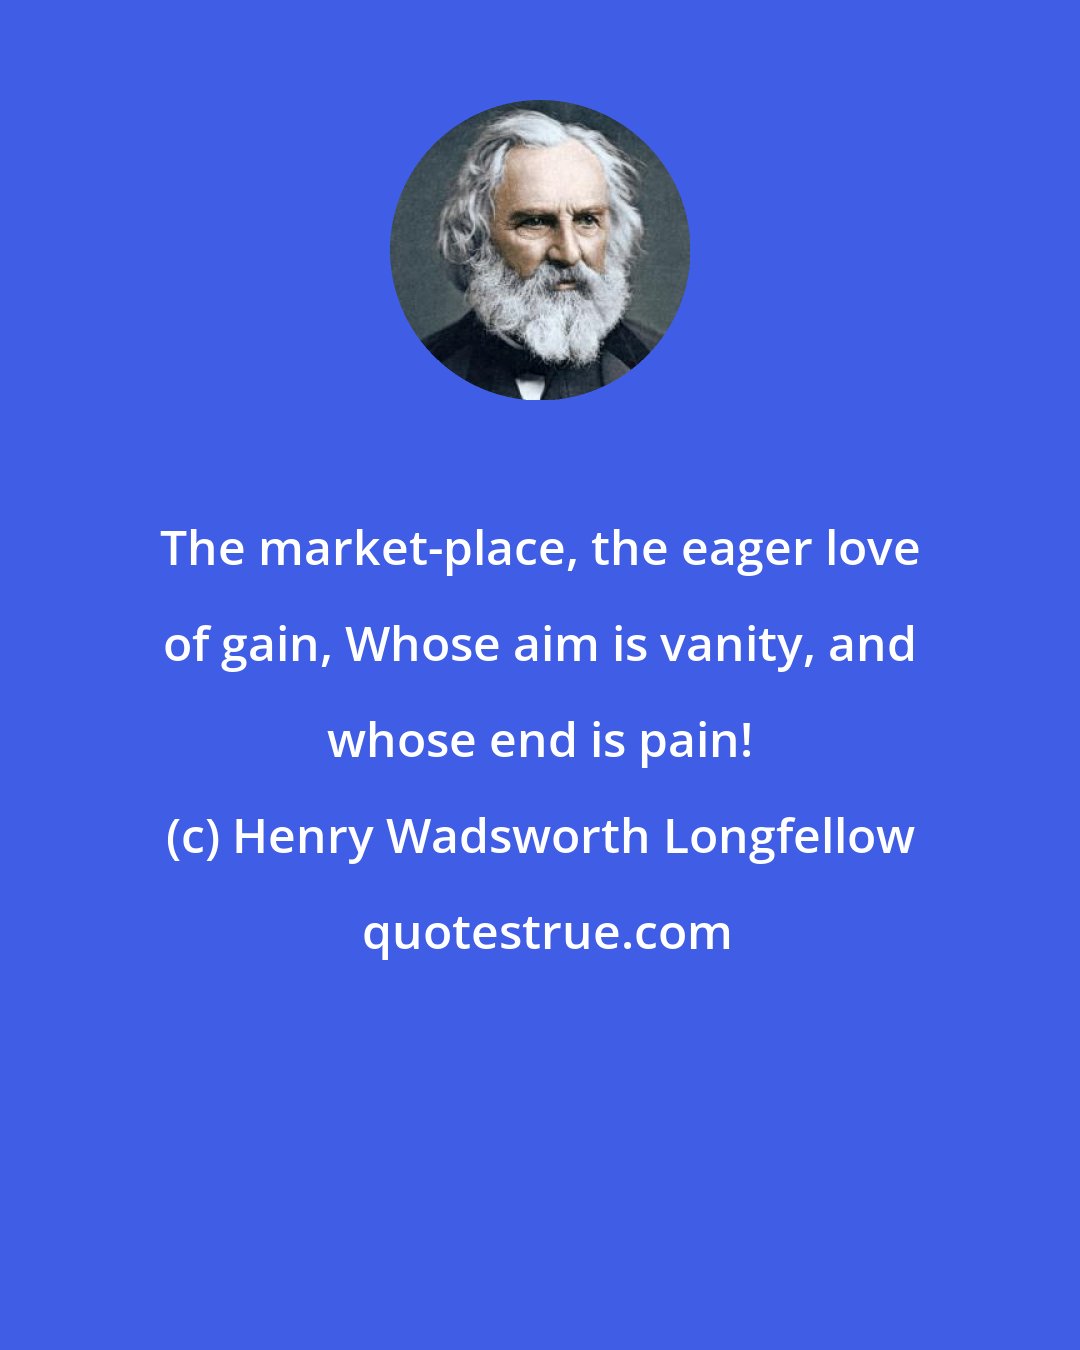 Henry Wadsworth Longfellow: The market-place, the eager love of gain, Whose aim is vanity, and whose end is pain!